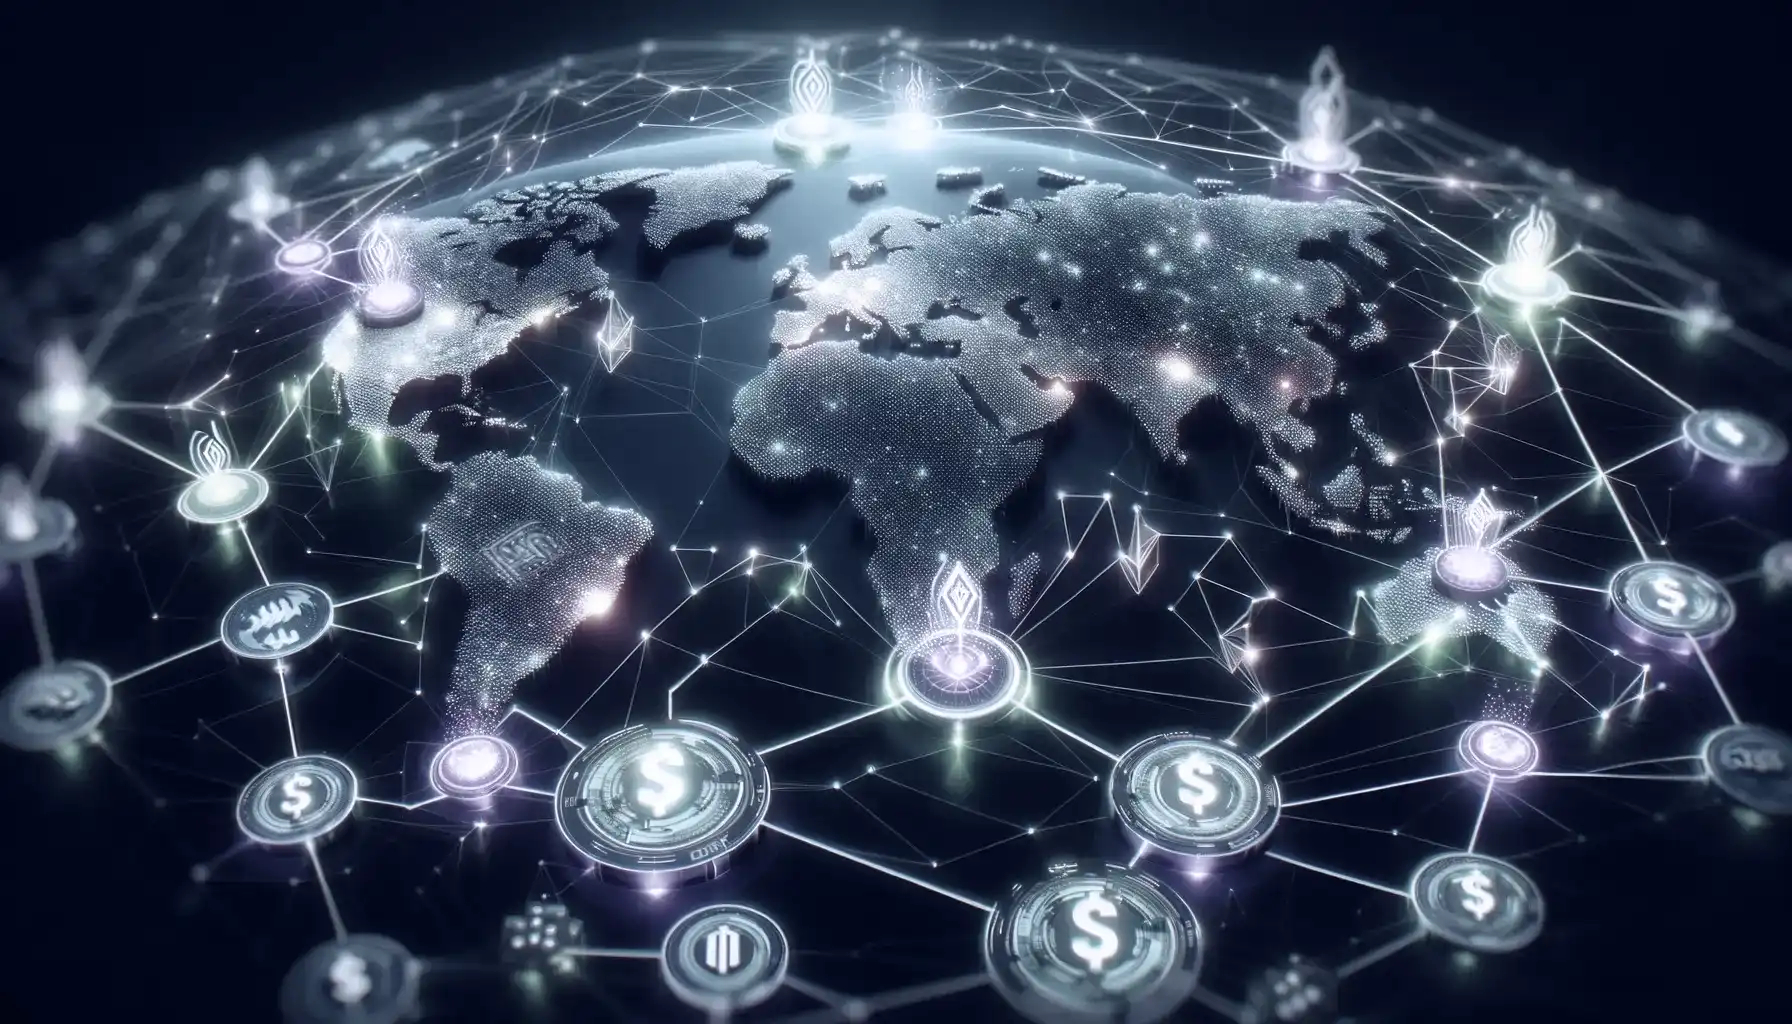 This image illustrates a company's blockchain services designed to facilitate cross-border payments and SWIFT transfers. It features a representation of the global financial network, possibly showcasing a world map with key financial centers highlighted. The focus is on the seamless integration of blockchain technology with the SWIFT system, ensuring reliable, end-to-end cross-border payments. The visualization includes interconnected nodes and pathways that represent the blockchain network, all illuminated in neon purple and green lights. These vibrant lights symbolize the efficiency, security, and connectivity of the blockchain-enabled SWIFT transfer system. The overall design is modern and digital, effectively conveying the advanced capabilities of the company's blockchain services in enhancing and securing global financial transactions.